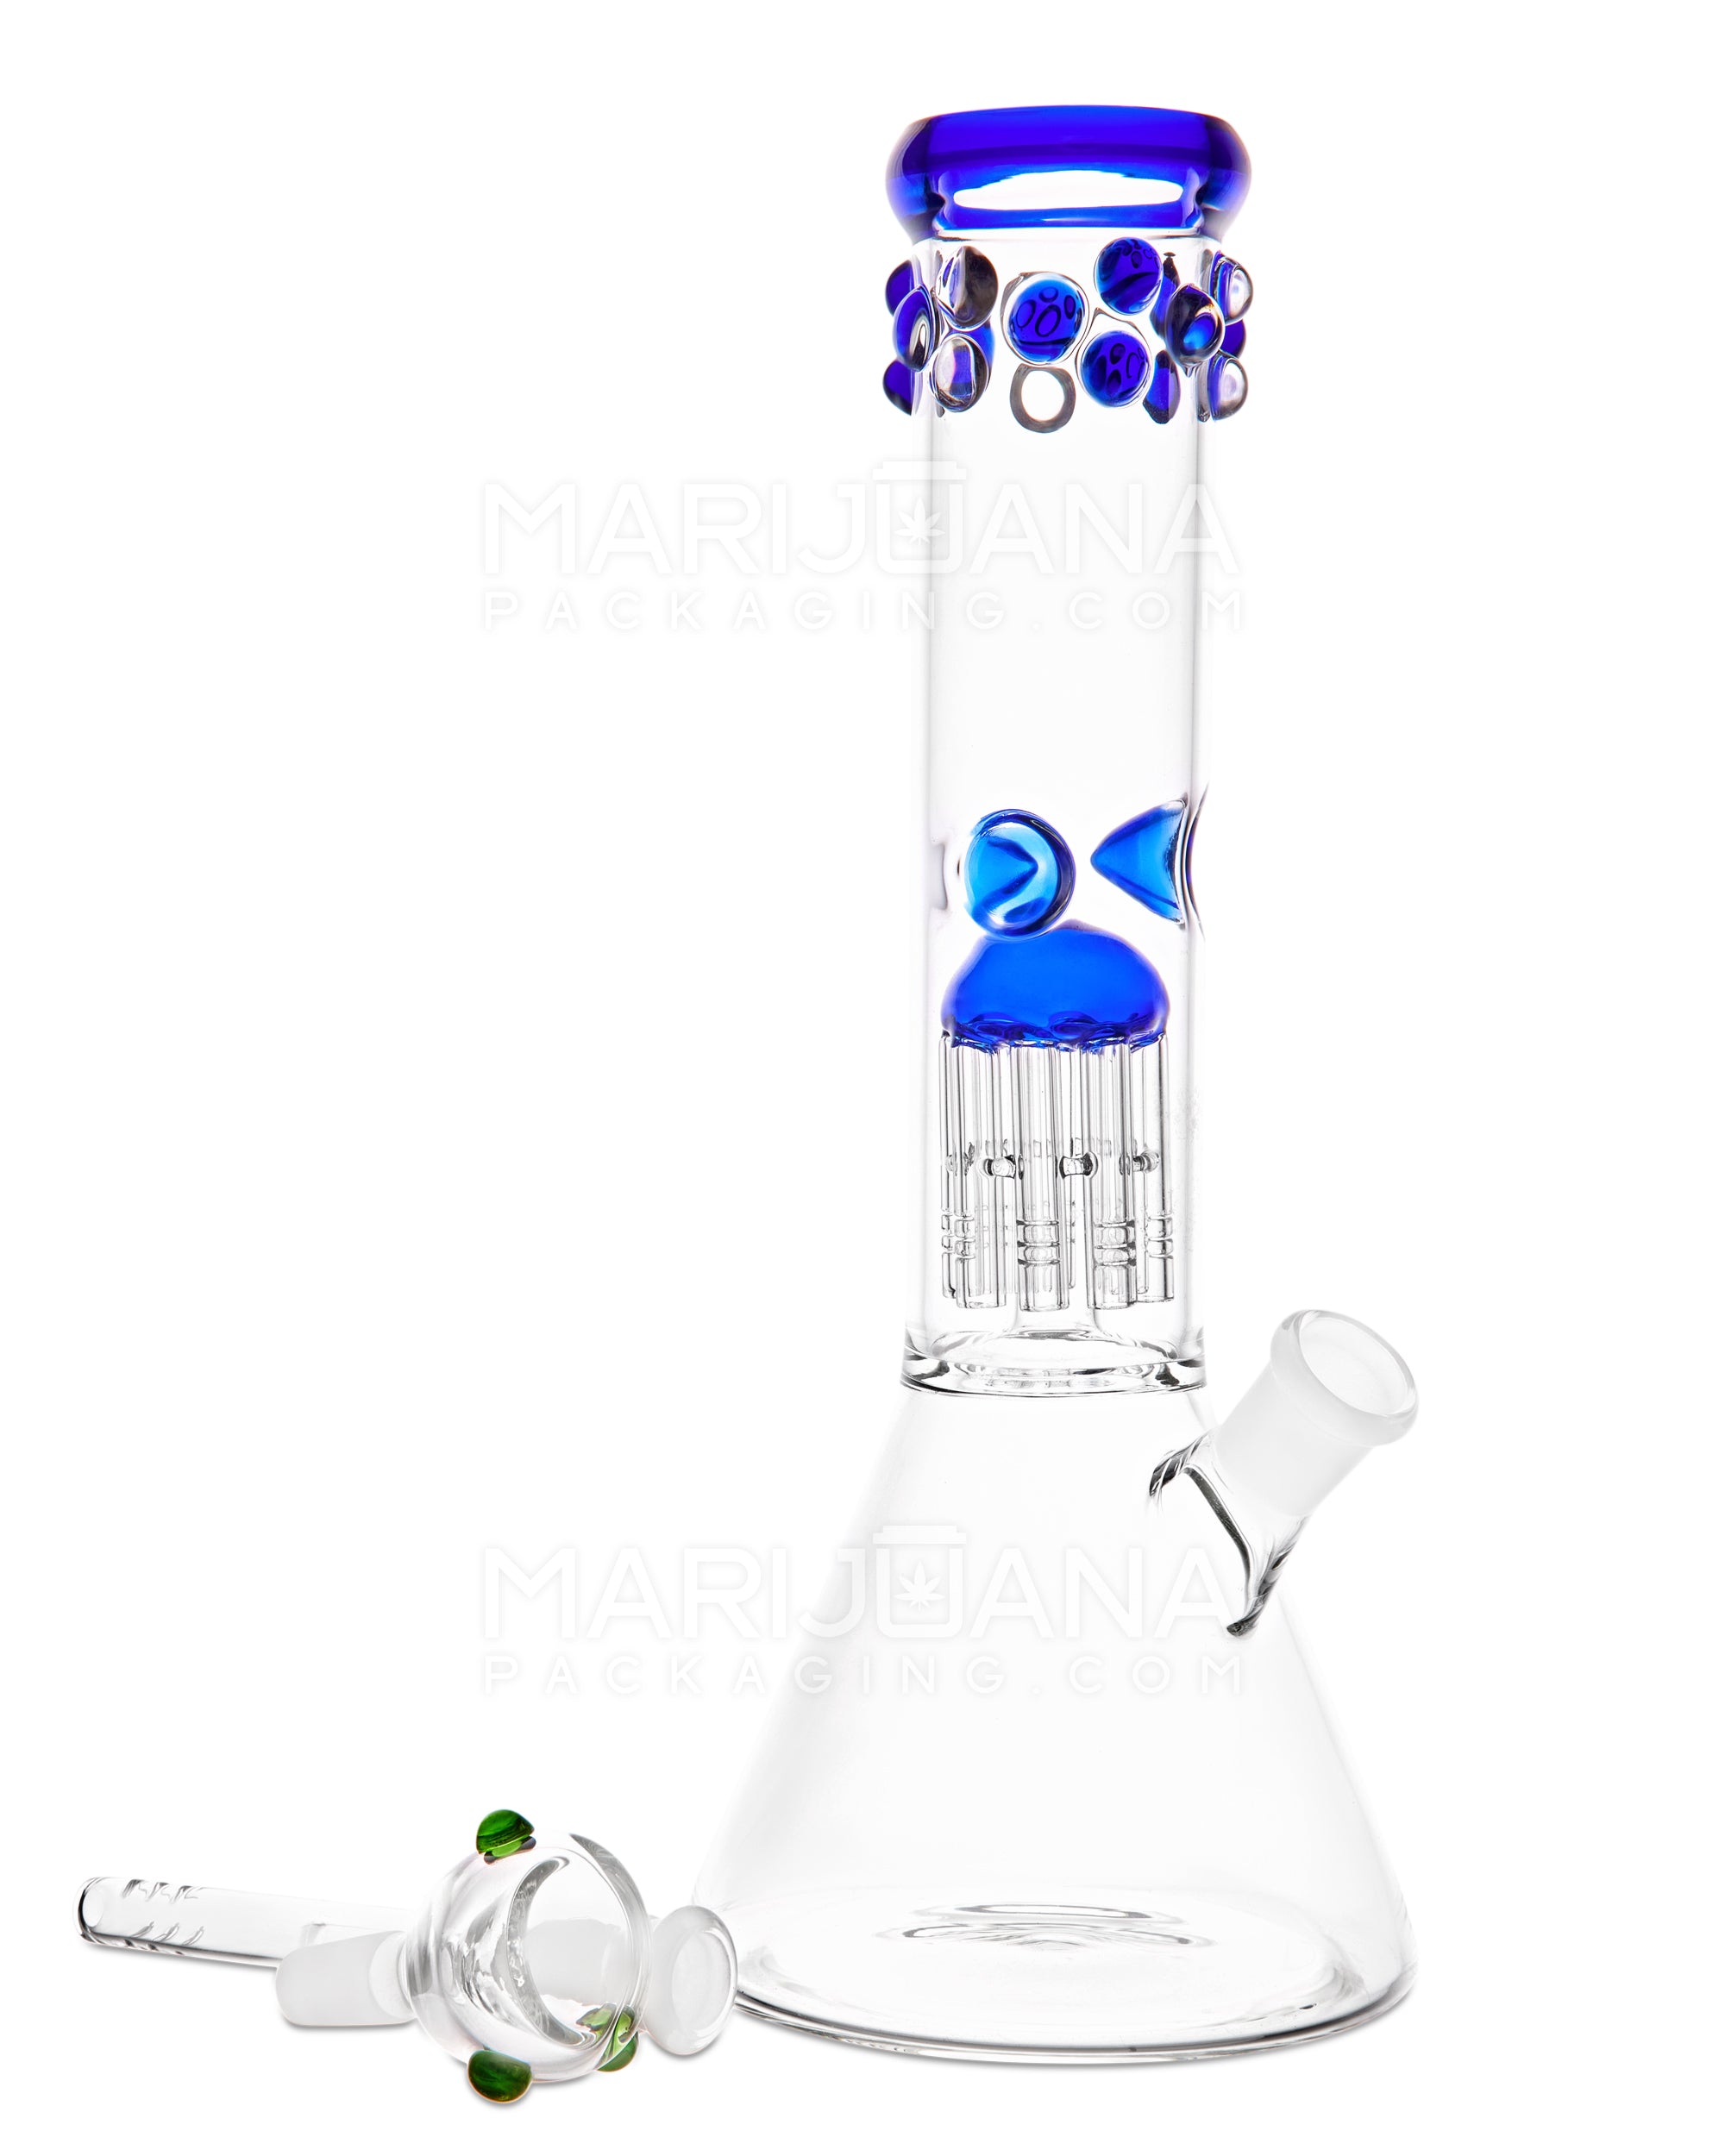 Straight Neck Tree Perc Thick Glass Beaker Water Pipe w/ Ice Catcher | 12in Tall - 14mm Bowl - Blue - 2